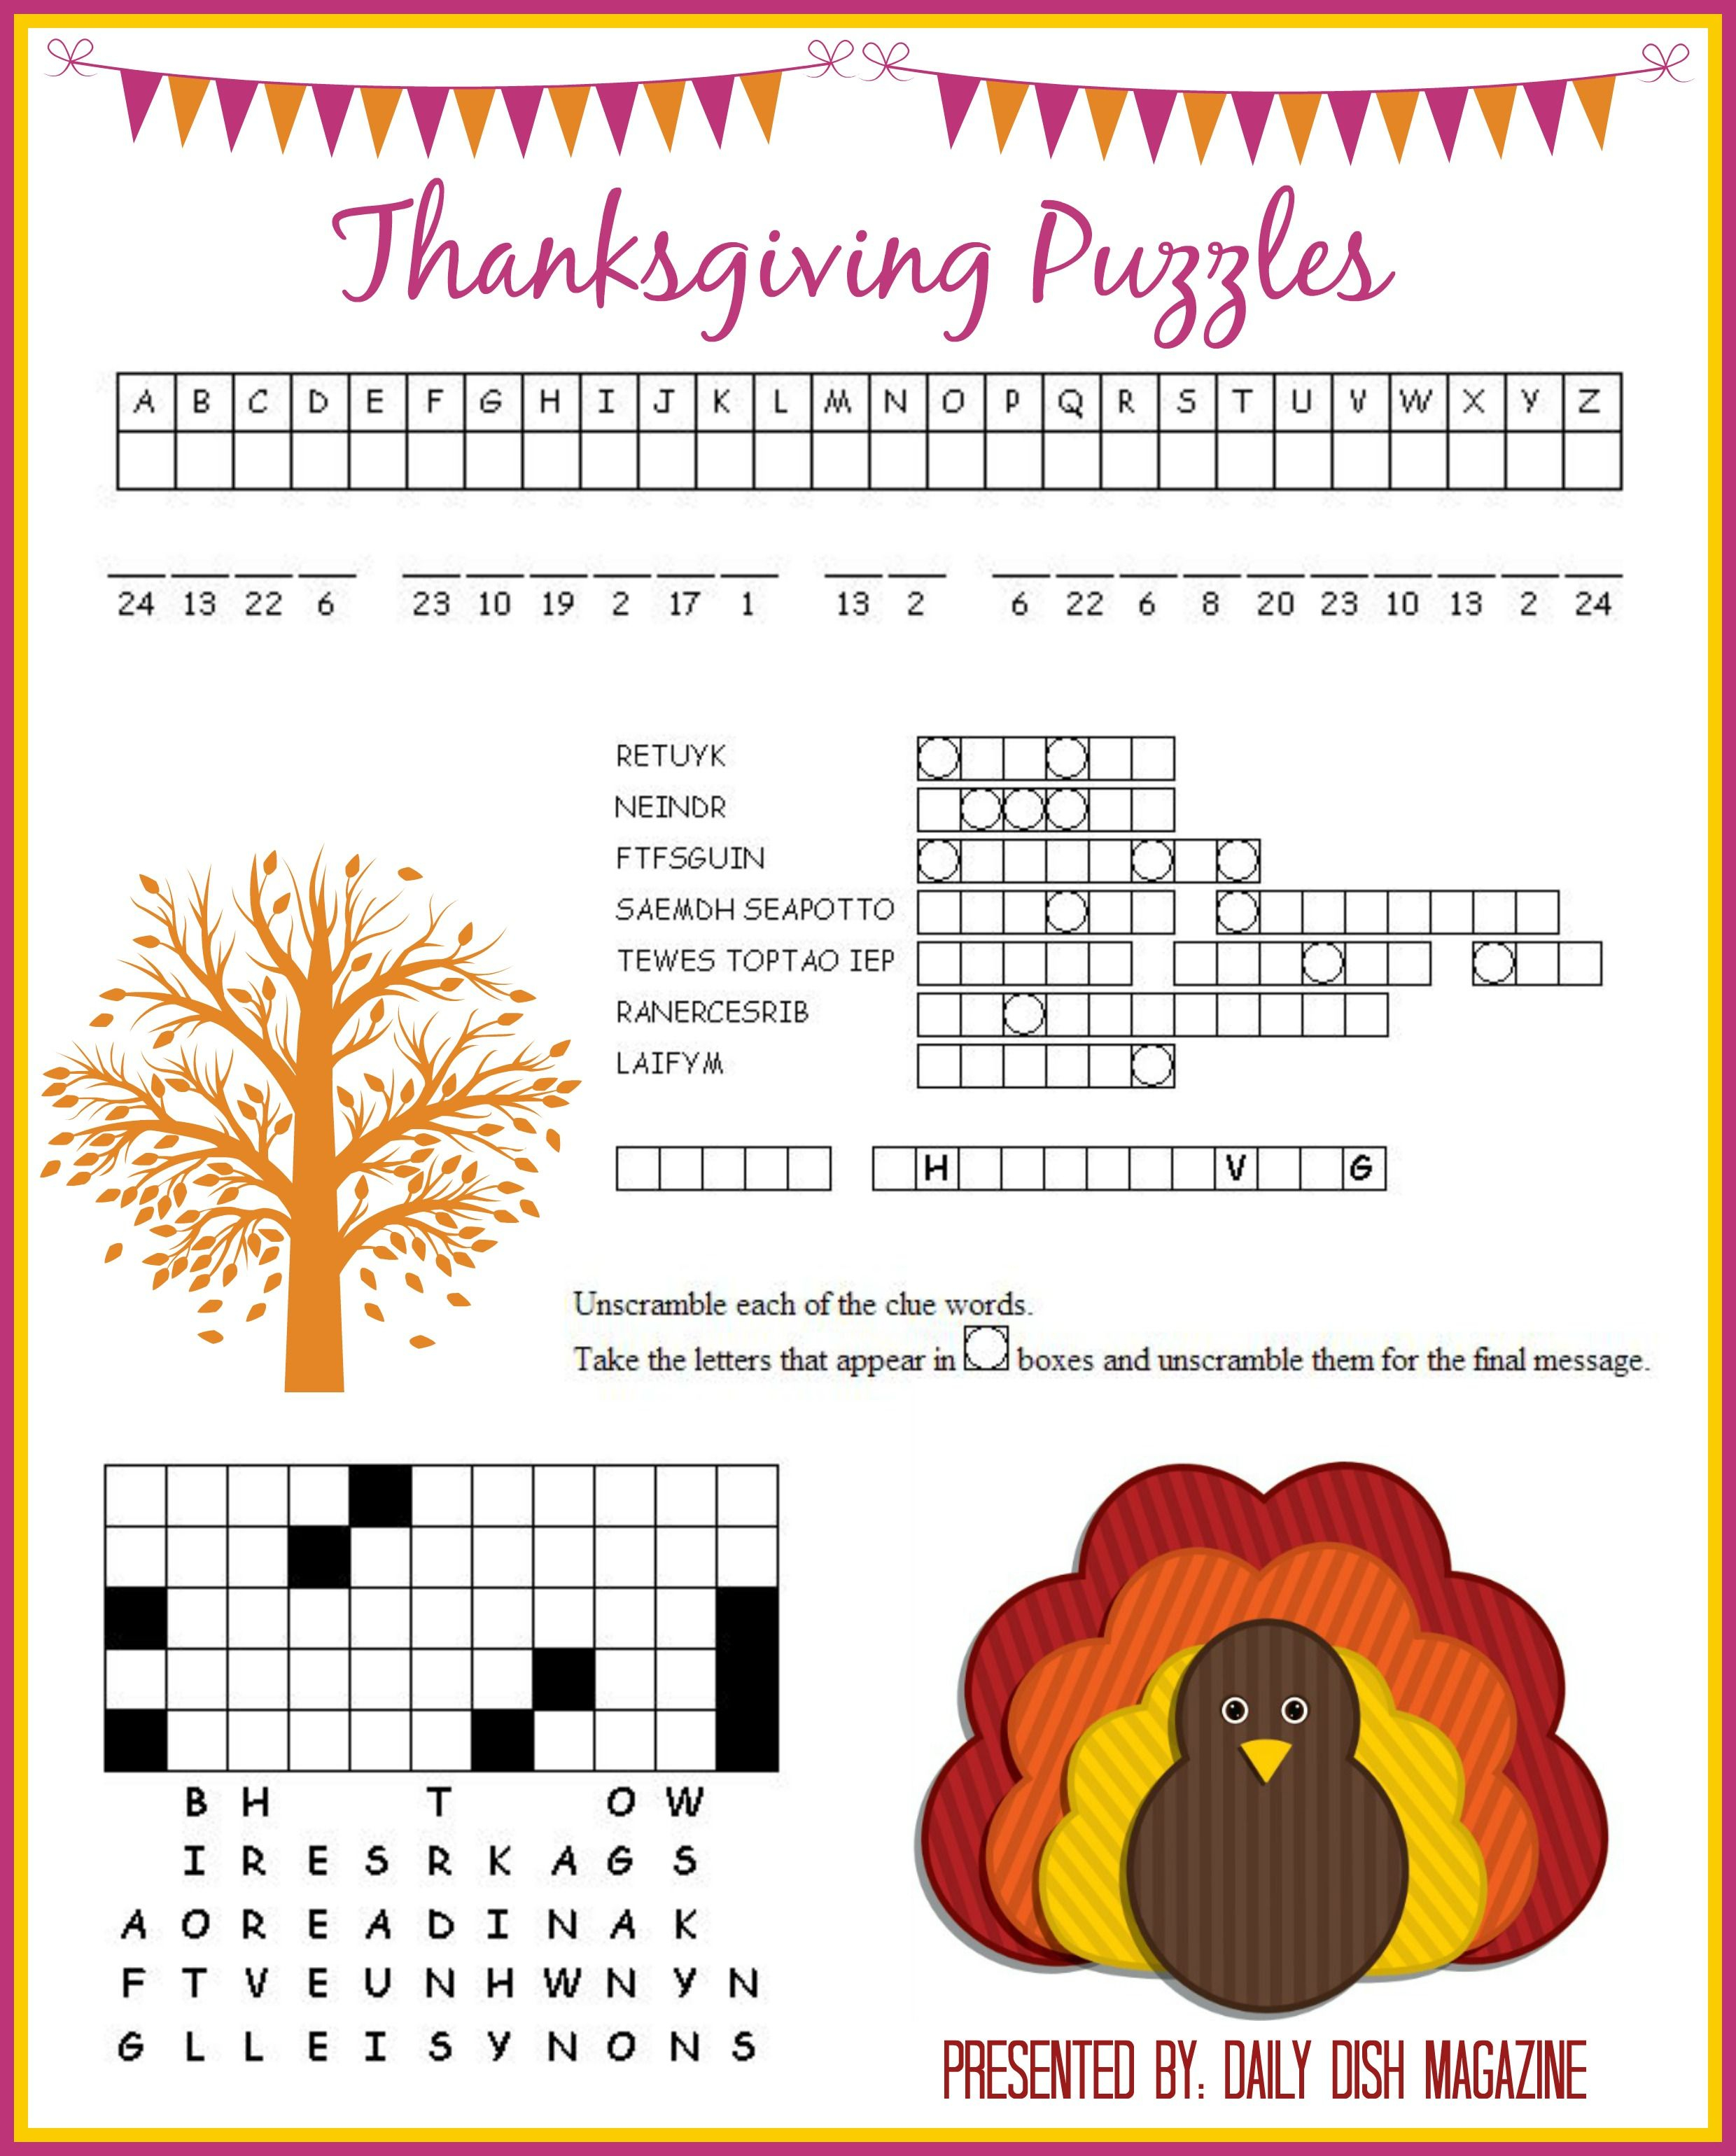 Thanksgiving Puzzles Printables | *holidays We Celebrate - Printable Thanksgiving Puzzles